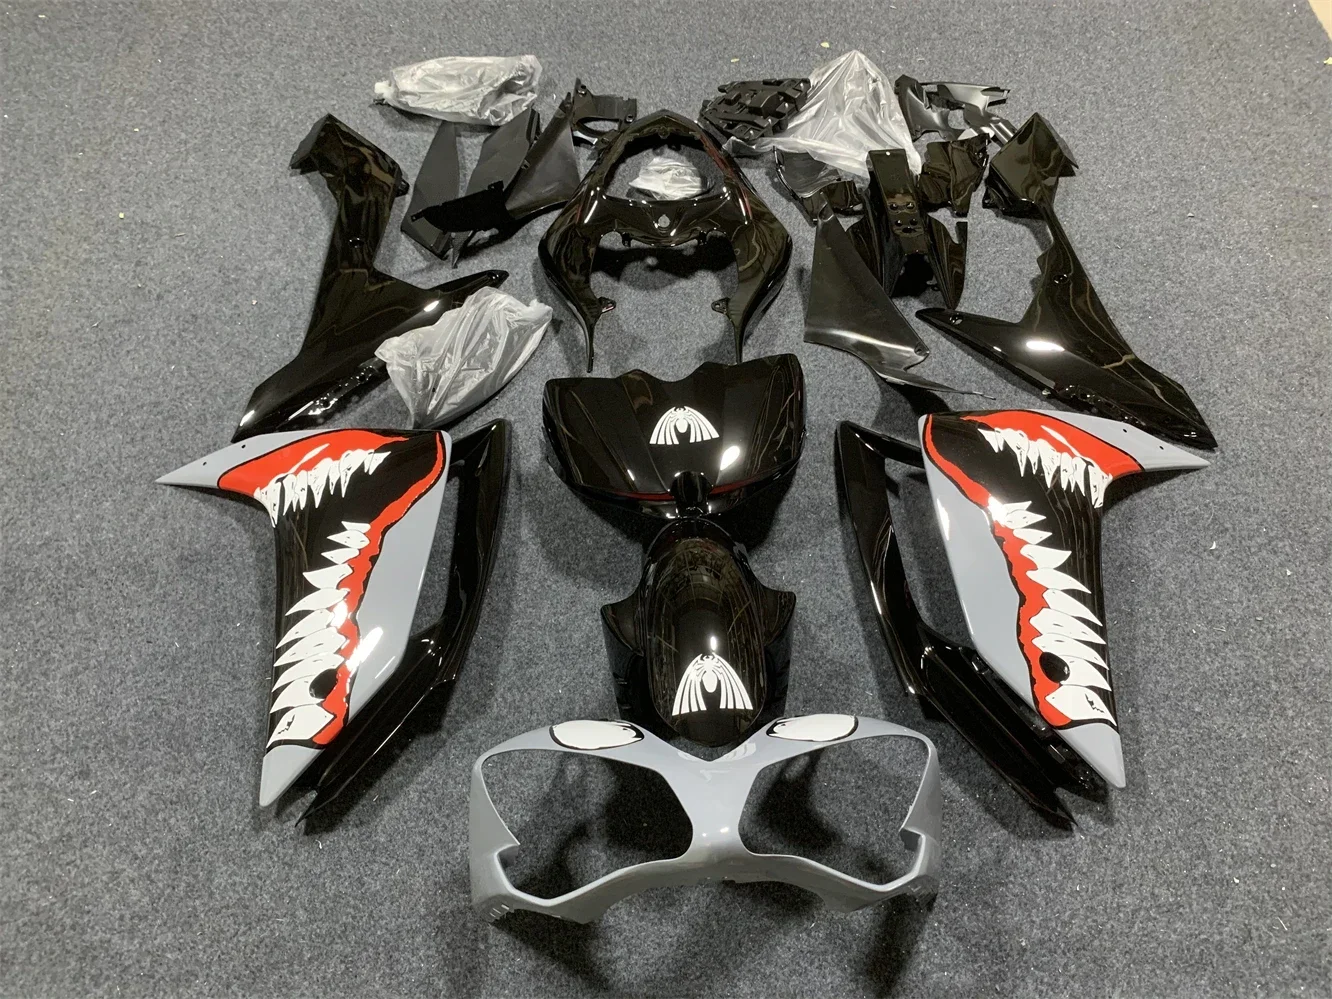 

Motorcycle Bodywork Set for YZF R1 2007 2008 ABS Plastics Full Fairings Kit High Quality Injection Mold Accessories